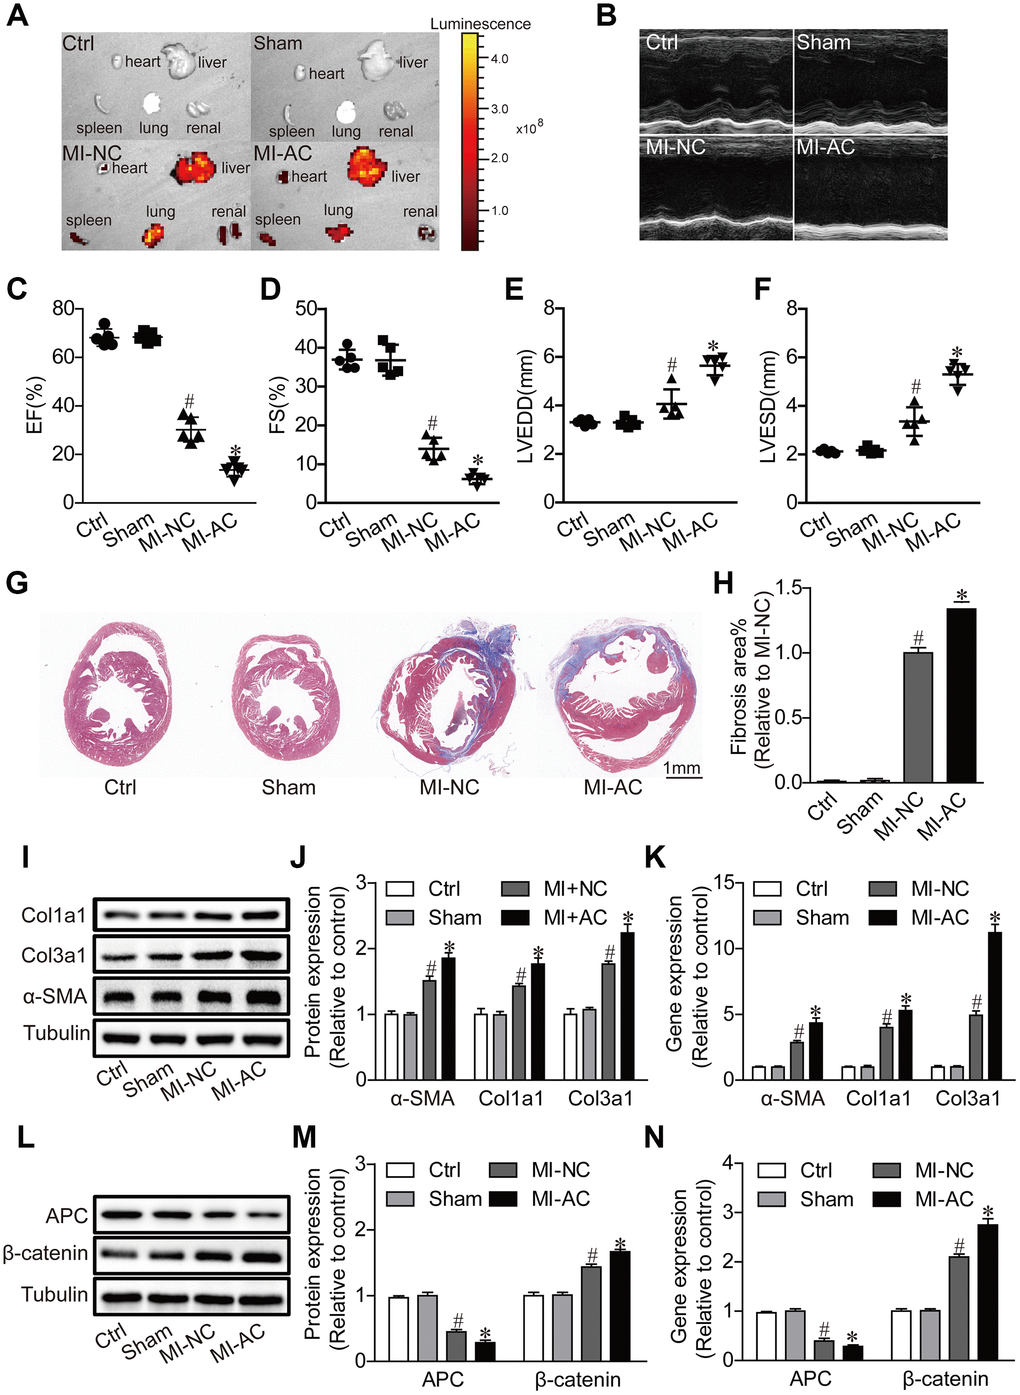 Activated CD4+ T cells-derived exosomes deteriorate cardiac function post-MI in mouse. (A) Ex vivo fluorescence imaging of major organs from mice. MI-NC: mice underwent myocardial infarction and injected with DiO-labeled naive CD4+- exosomes by by tail vein. MI-AC: mice underwent myocardial infarction and injected with DiO-labeled activated CD4+- exosomes by by tail vein. (B) Representative echocardiography at the fourth week post-MI. n = 5 per group. (C–F) Statistic summary from (B). EF: ejection fraction; FS: fractional shortening; LVESD: left ventricular end-systolic dimension; LVEDD: left ventricular end-diastolic dimension (n = 5). #P G, H) Masson's trichrome staining of the cross section of the heart and quantification of the total fibrotic area using Image J software. The images shown are representative of three independent experiments. n = 5 per group. Scale bar = 1mm. #P I) Expression levels of α-SMA, Col1a1 and Col3a1 were detected by western blot analysis. The blots shown are representative of three independent experiments. (J) Quantitative analysis of proteins expression of -SMA, Col1a1 and Col3a1 using Image J software. #P K) qPCR analysis of α-SMA, Col1a1 and Col3a1 levels in the myocardium. n=3 per group. #P L) Western blotting examination of APC and β-catenin protein expression. The blots shown are representative of three independent experiments. (M) Quantitative analysis of proteins expression of APC and β-catenin using Image J software. #P N) qPCR analysis of APC and β-catenin levels in the myocardium. n=3 per group. #P 